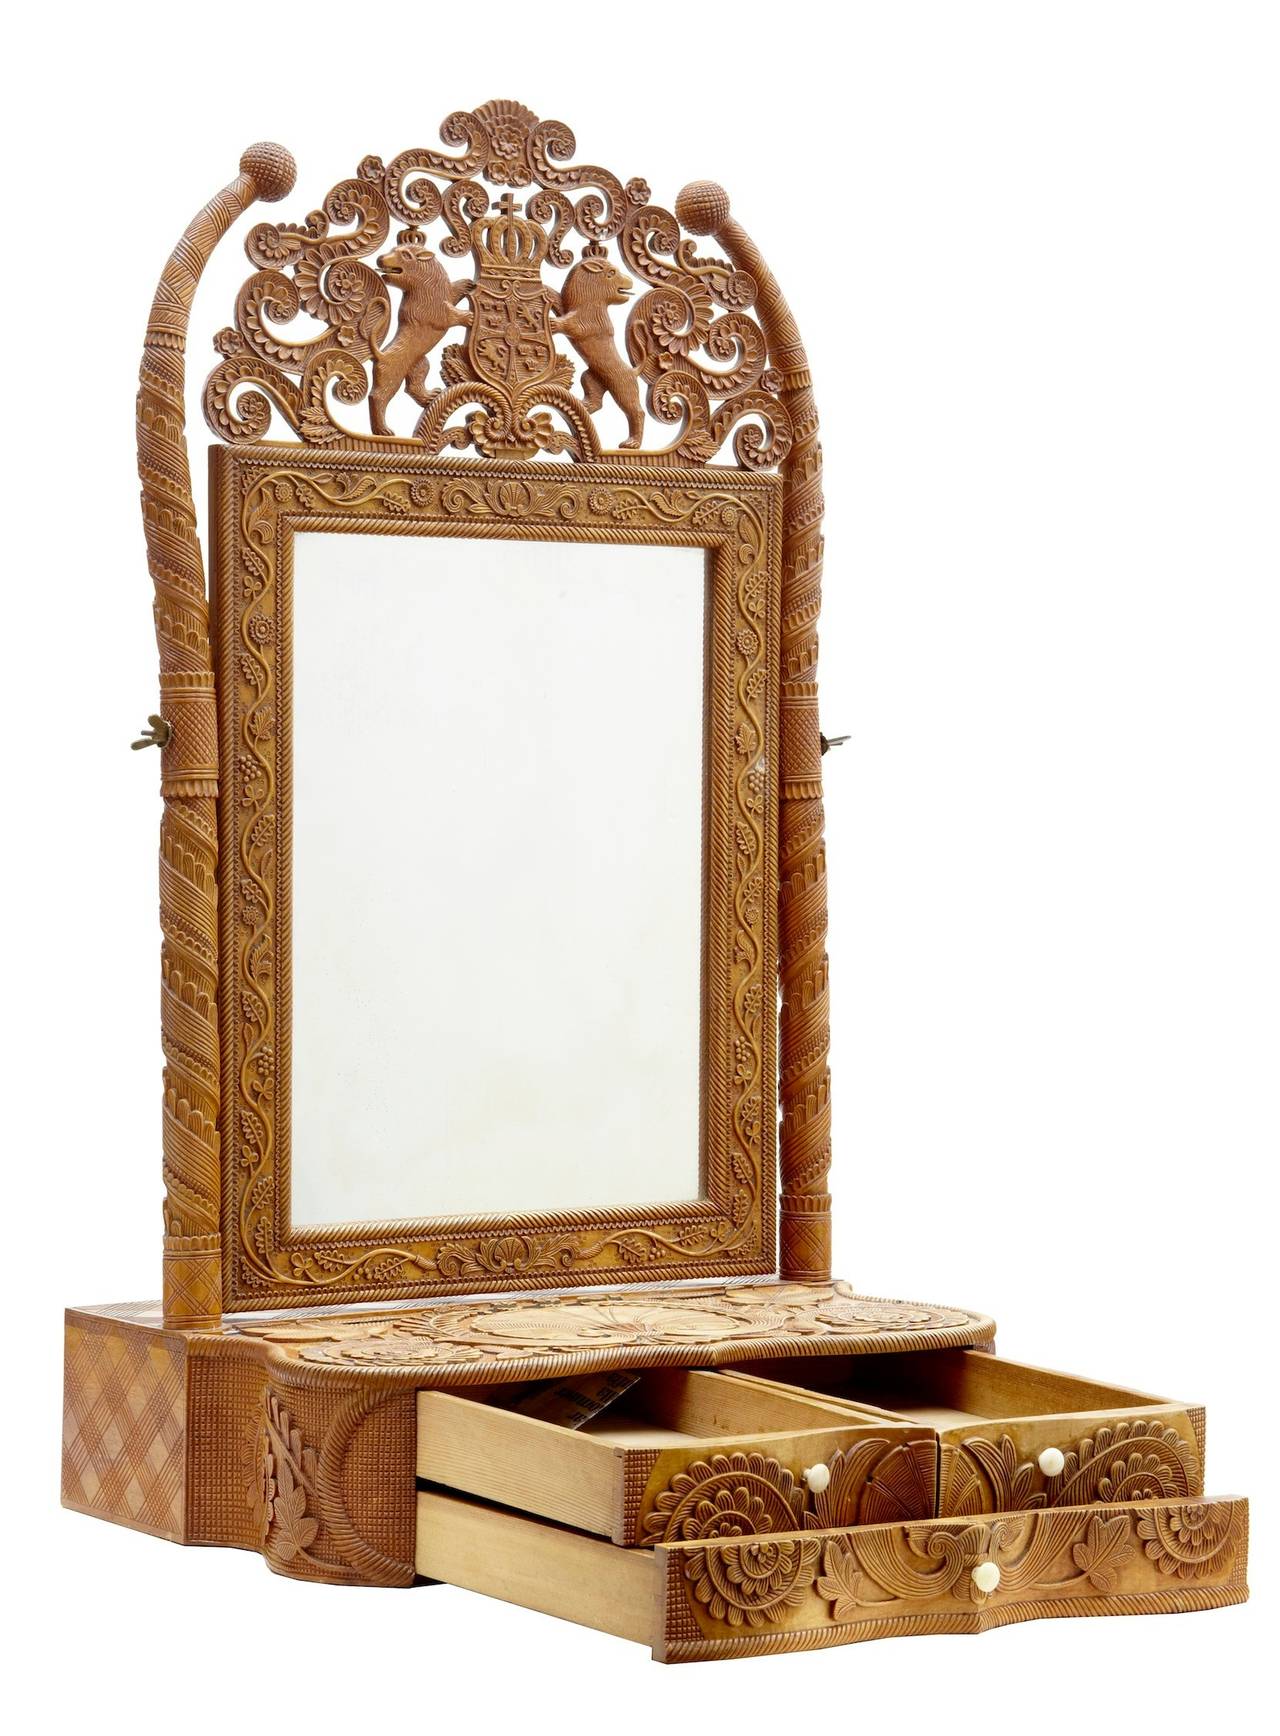 Rare and stunning table mirror, circa 1870. 

Fine example of carving which we struggled to identify origin wise, but it is Swedish with a strong Indian influence. 

Highest level of carving. 

Main feature is the coat of arms, which shows